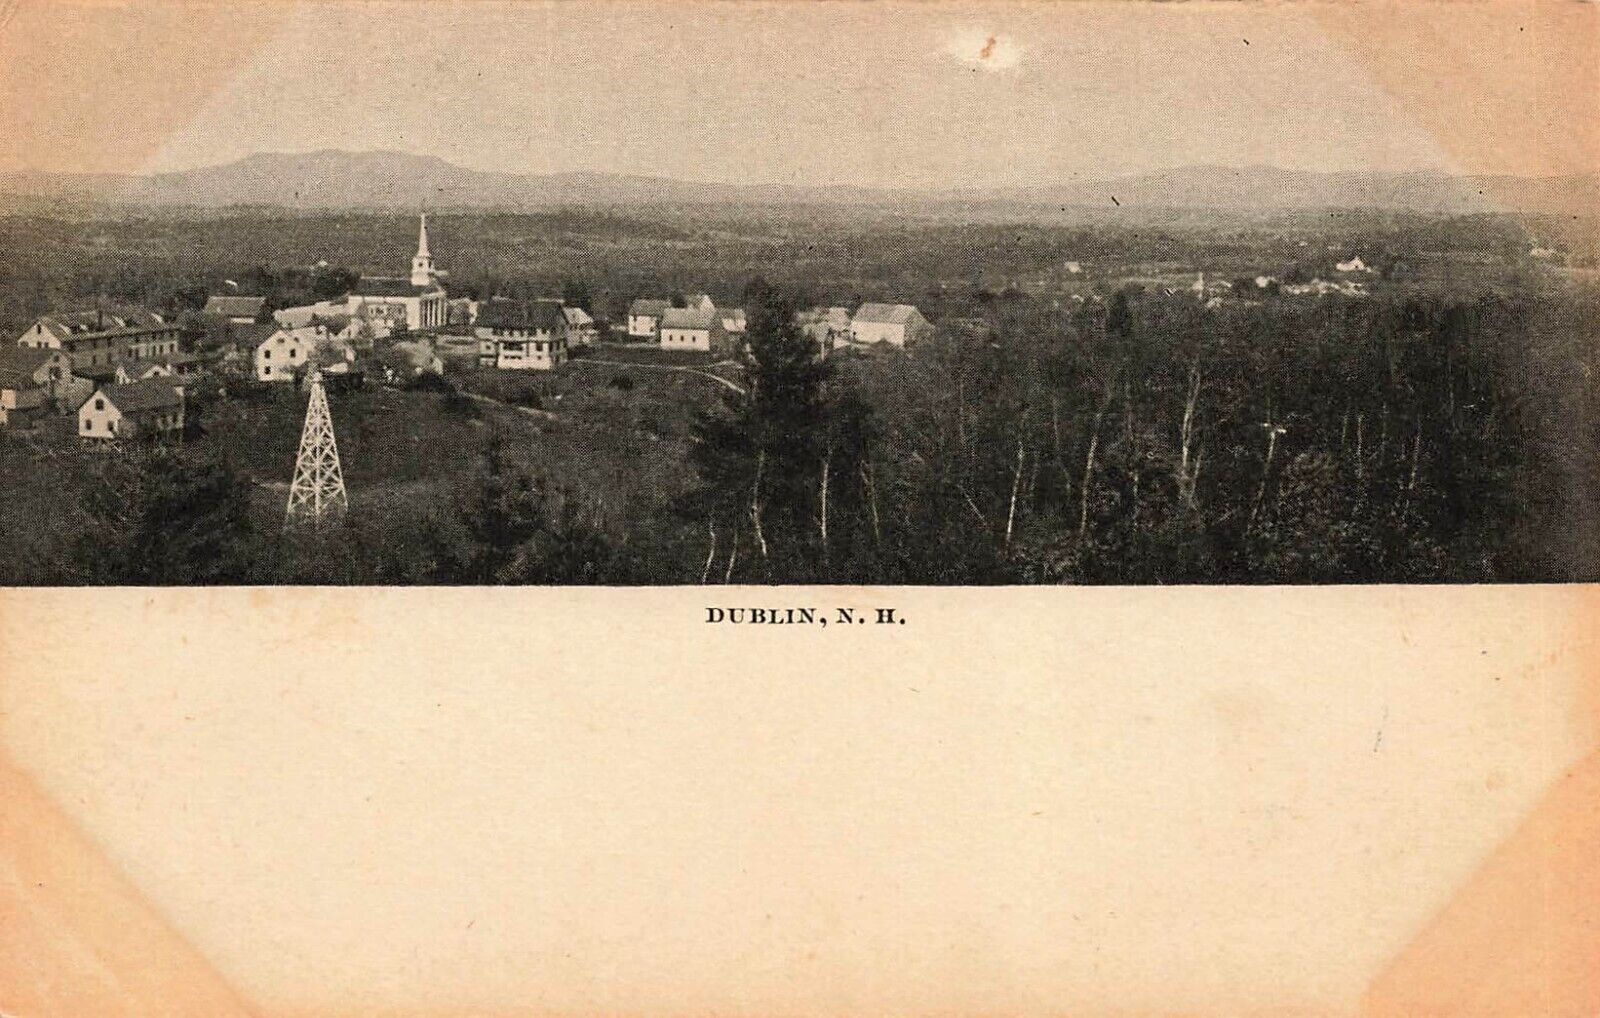 NEW HAMPSHIRE PHOTO POSTCARD: VIEW OF THE TOWN OF DUBLIN, NH UND/B